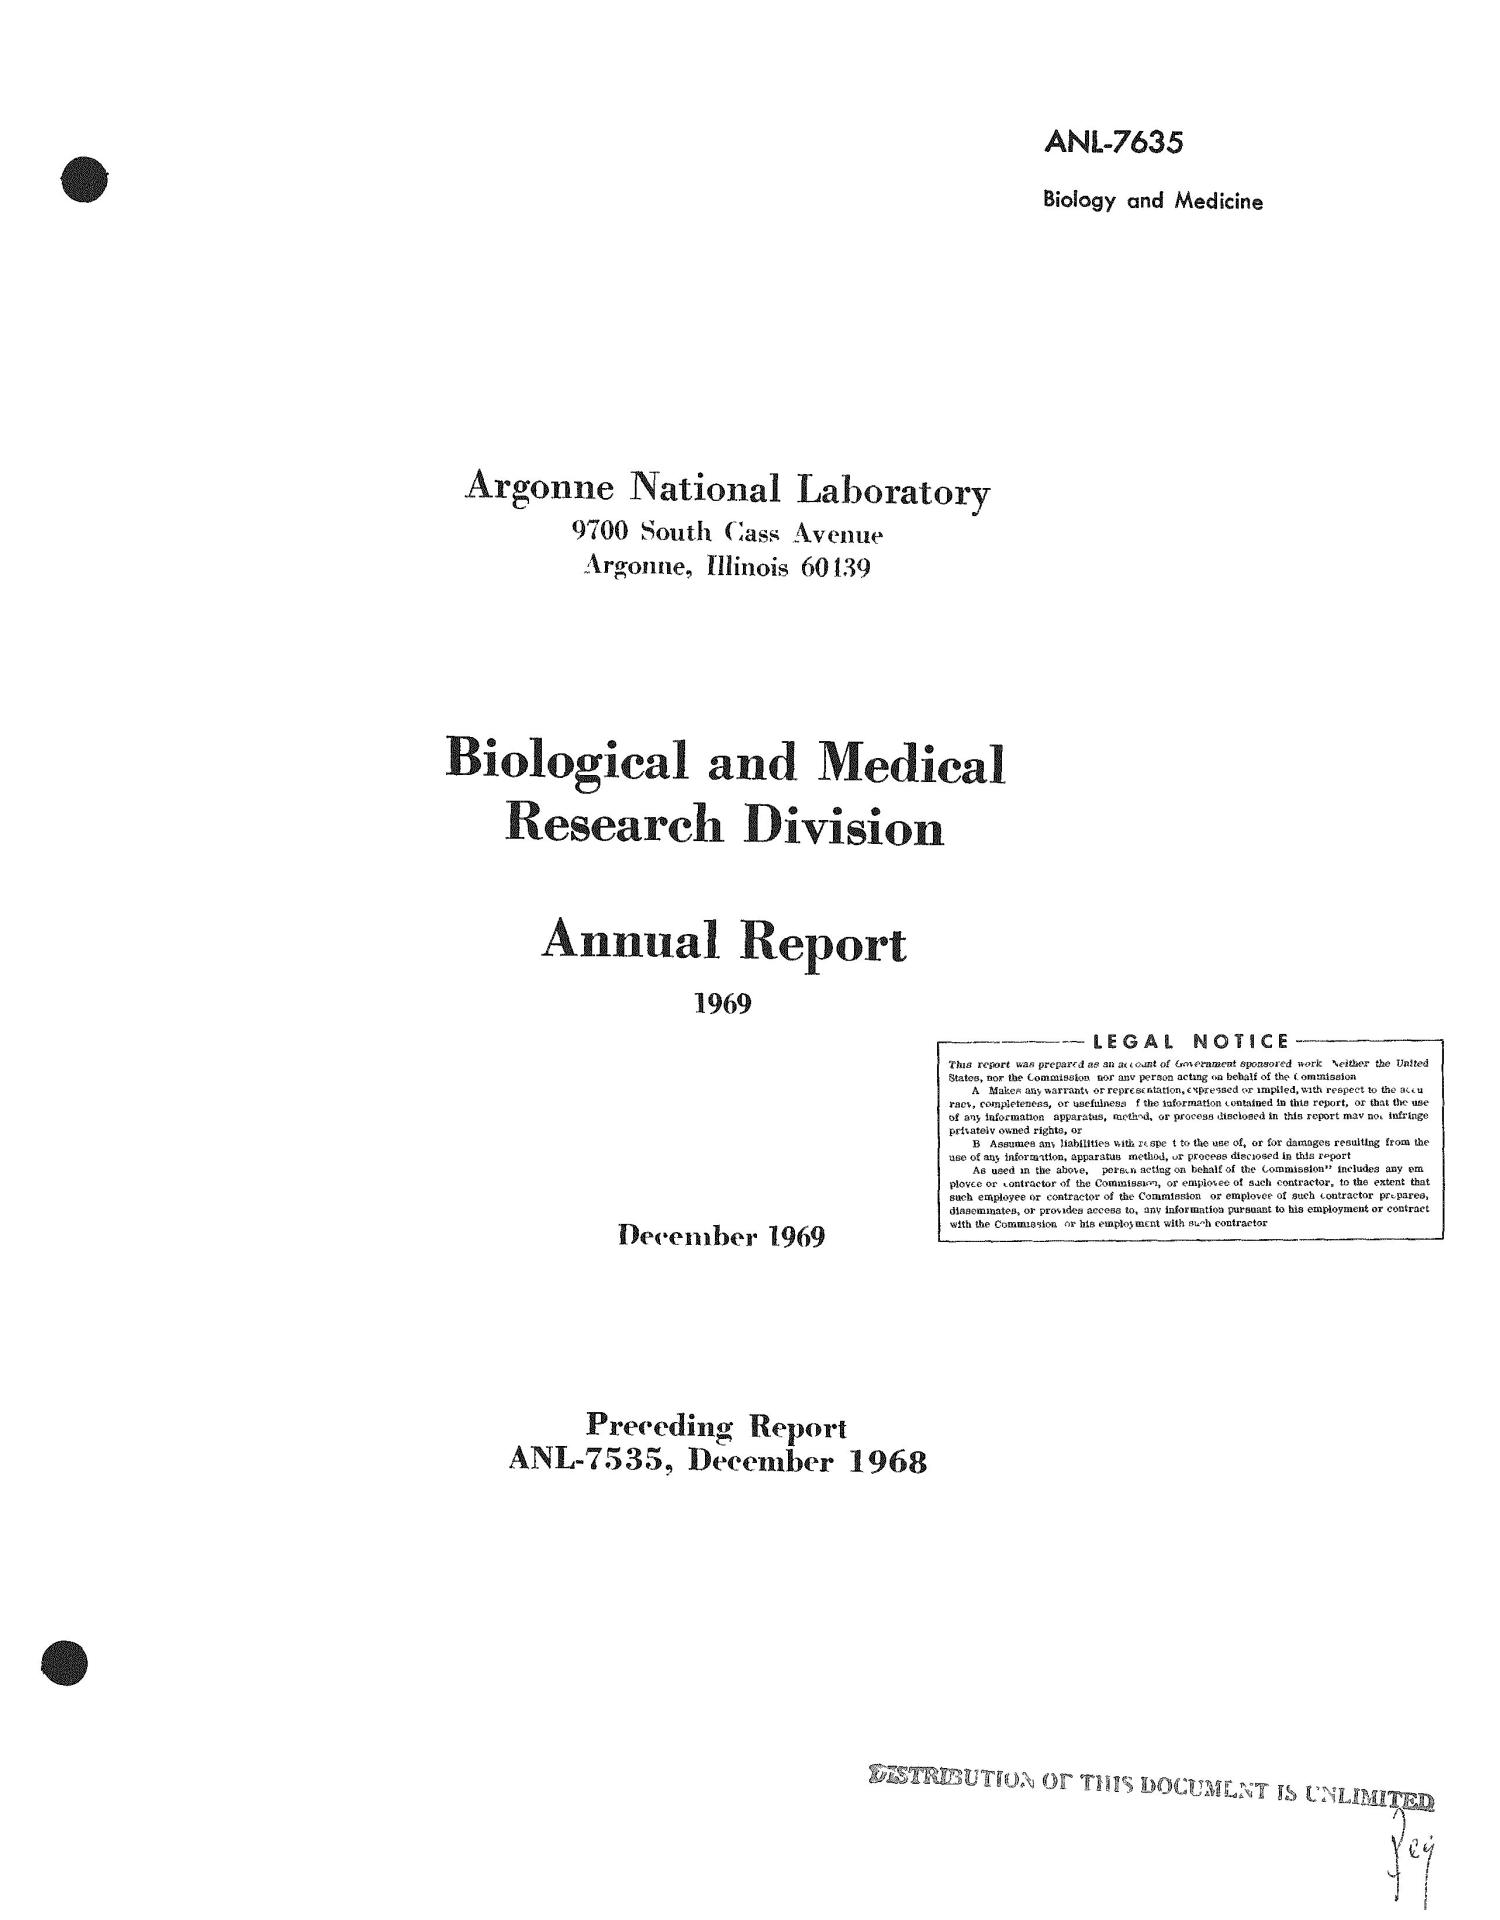 Biological and Medical Research Division Annual Report, 1969.
                                                
                                                    [Sequence #]: 1 of 352
                                                